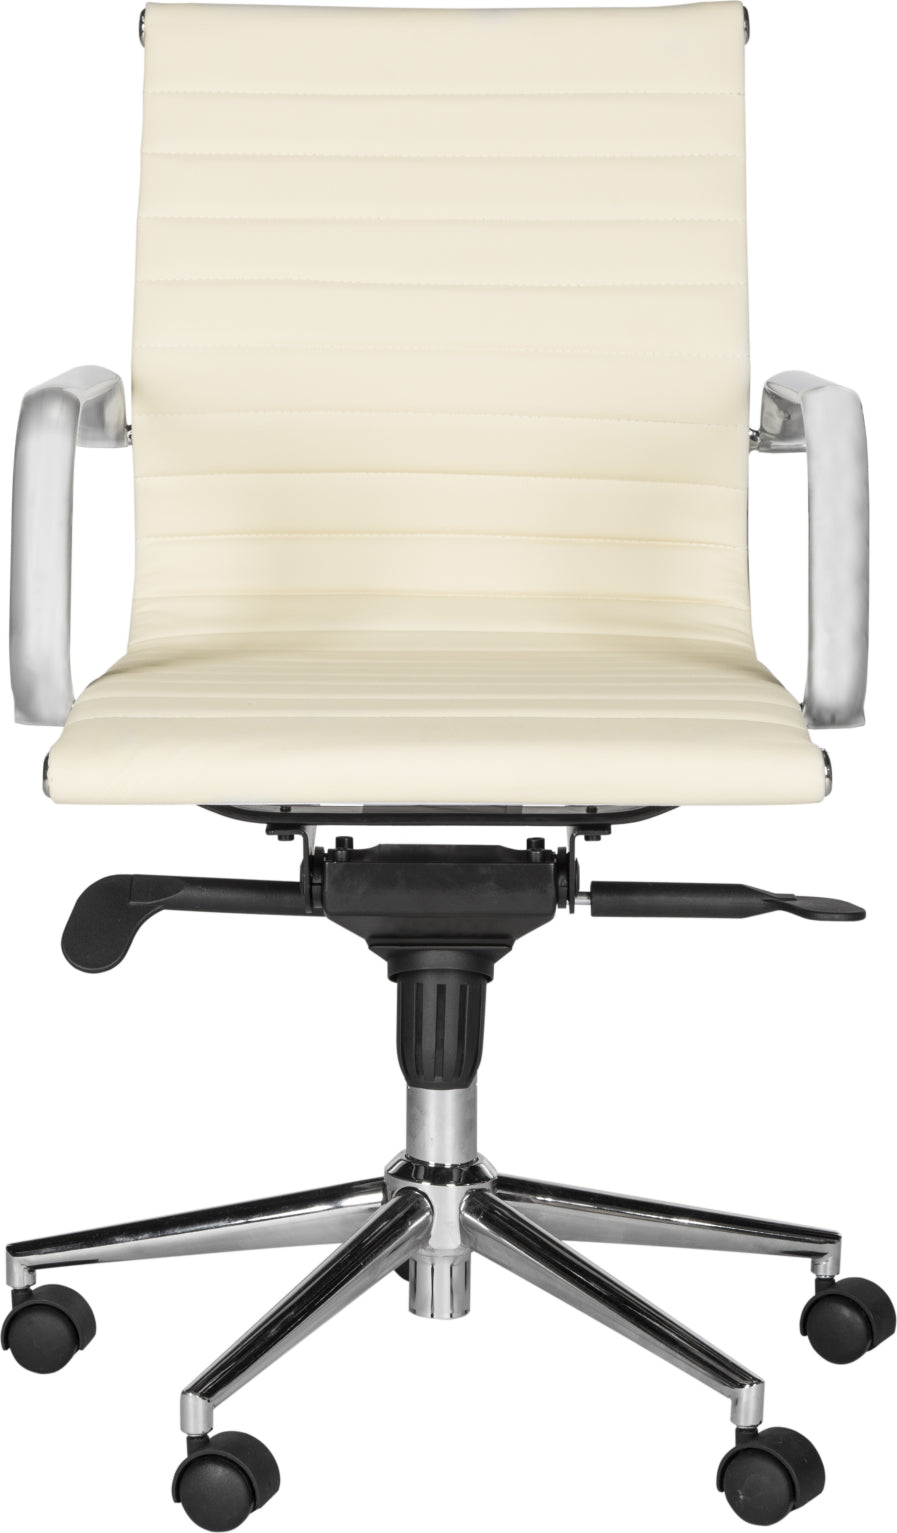 Safavieh Loreley Desk Chair White and Silver Furniture main image